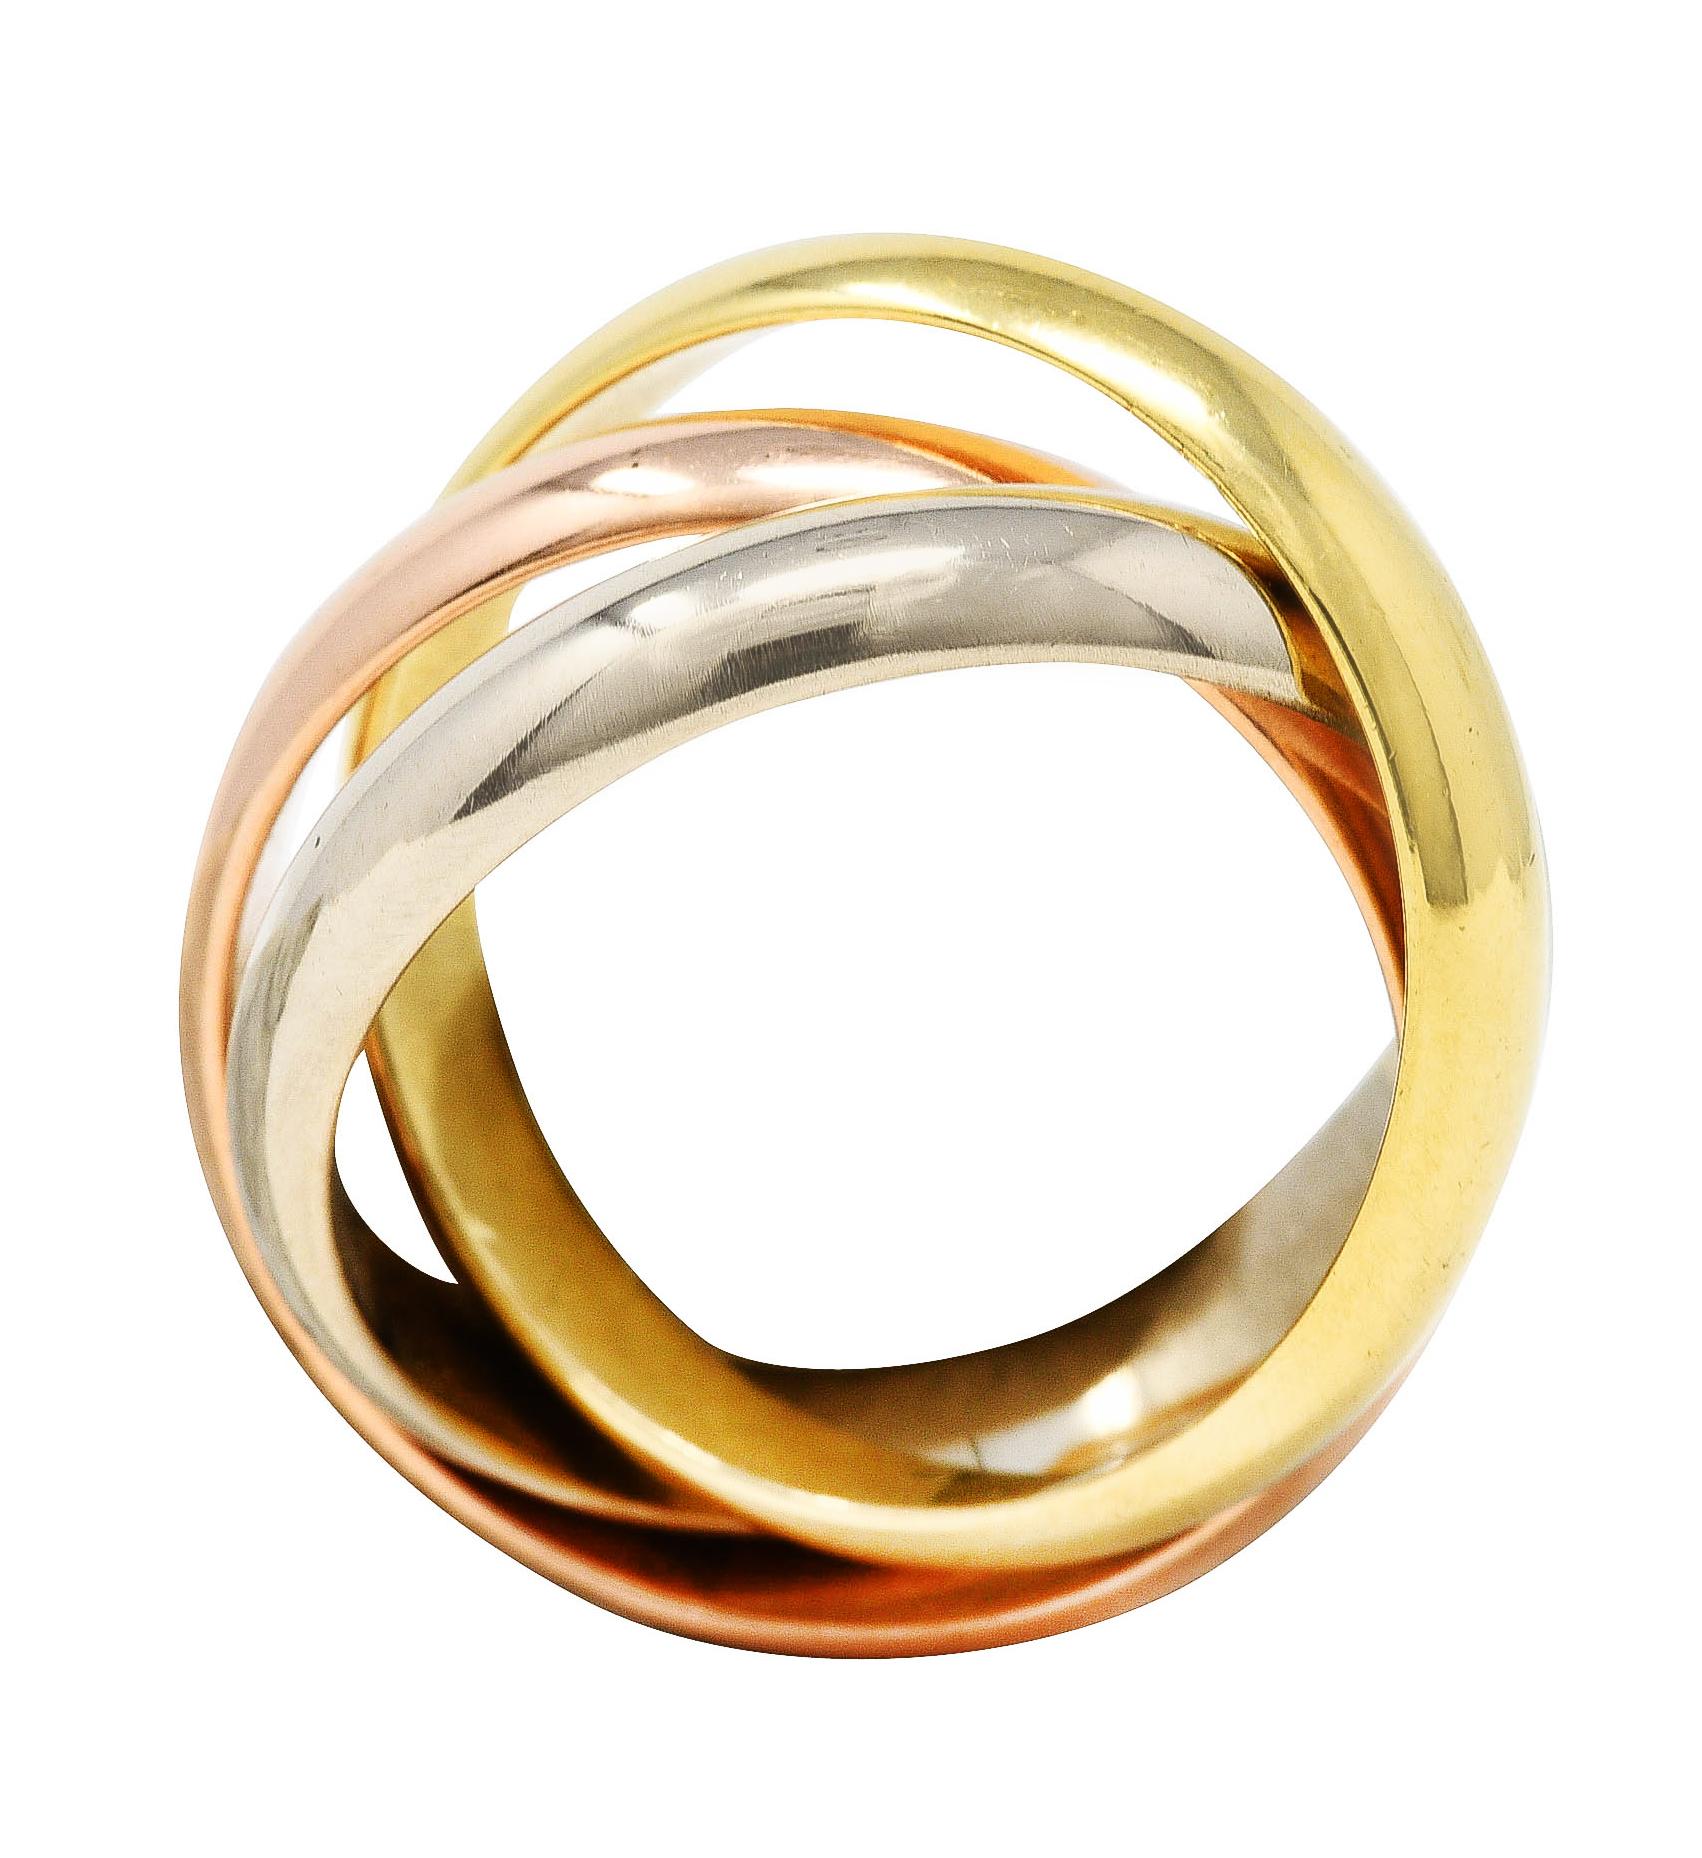 Women's or Men's 1997 Cartier Vintage 18 Karat Tri-Colored Gold Trinity Rolling Band Ring